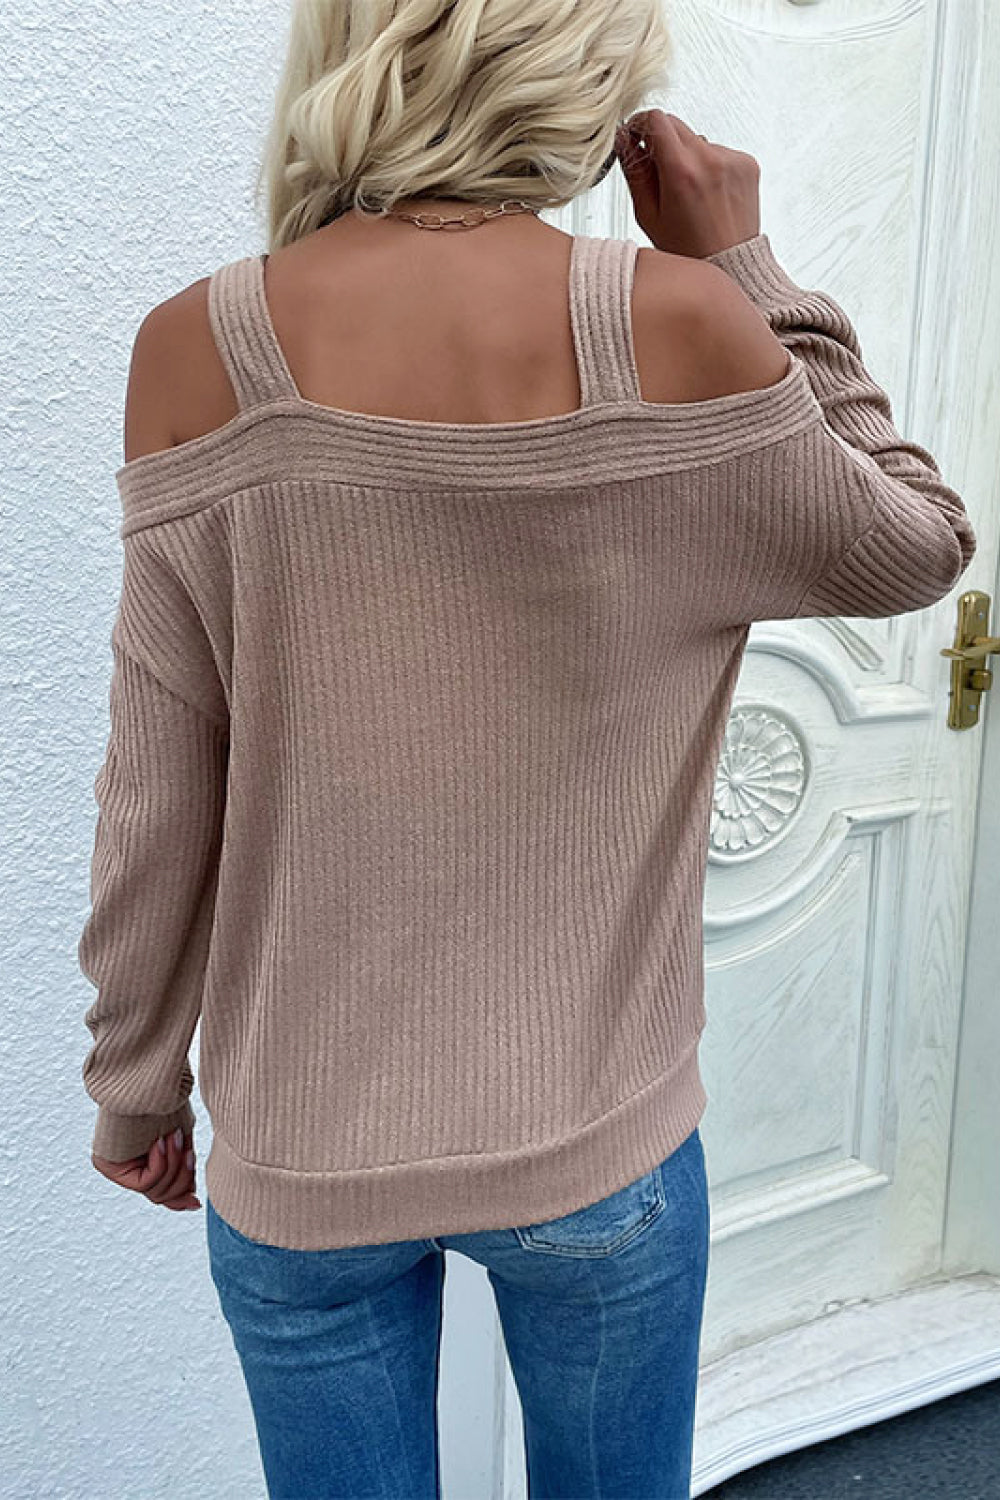 Women's Cold Shoulder Rib-Knit Sweater Size S-XL